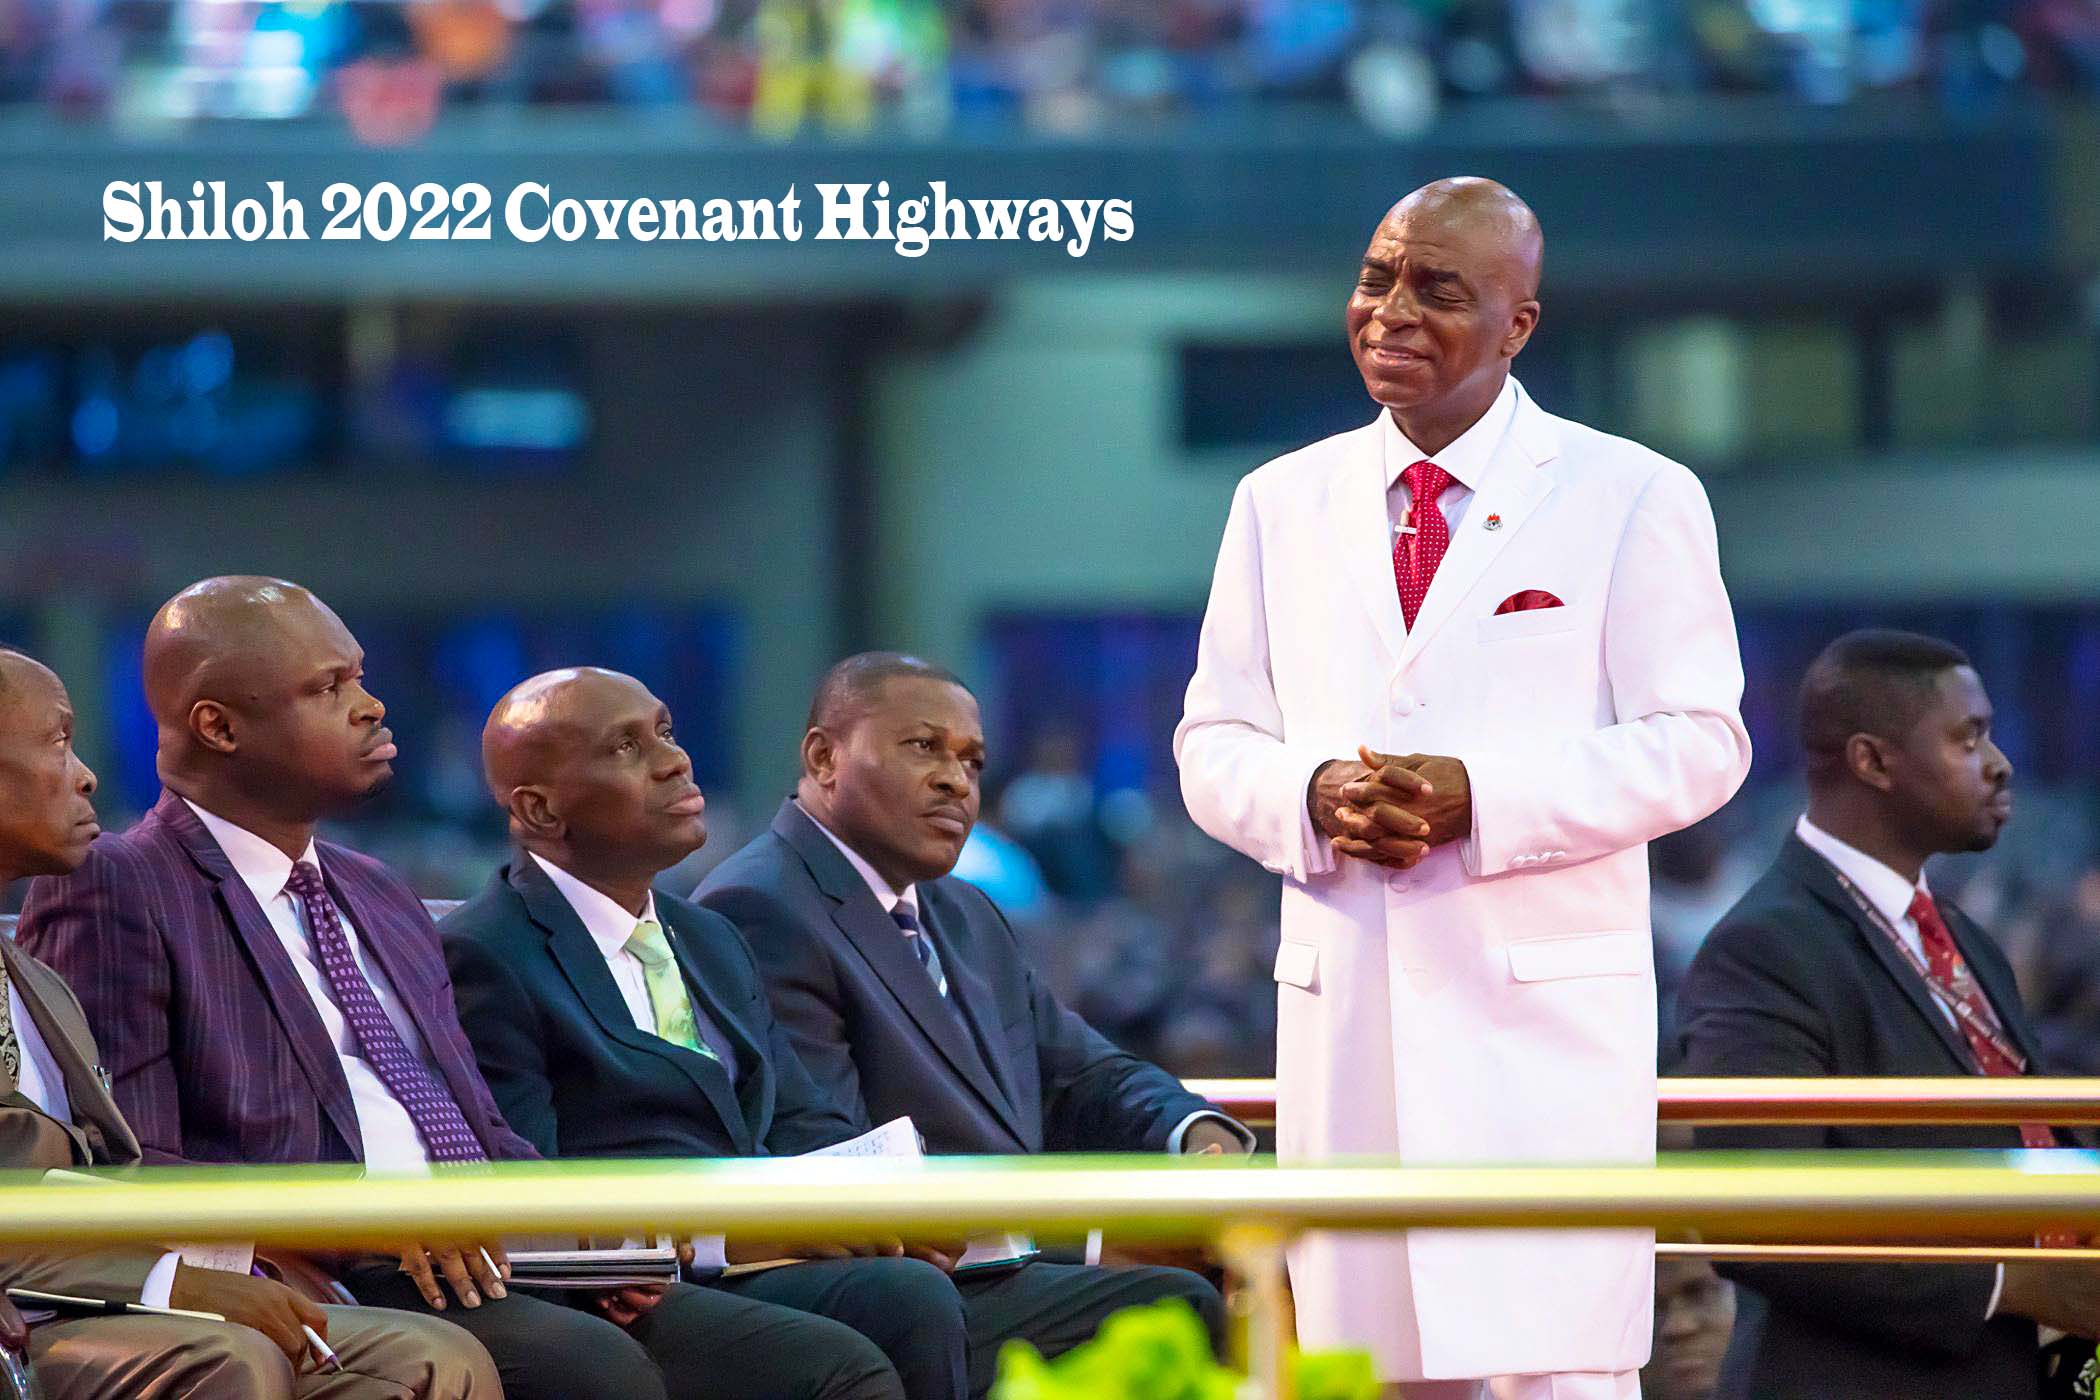 Get Ready for Shiloh 2022 Covenant Highways